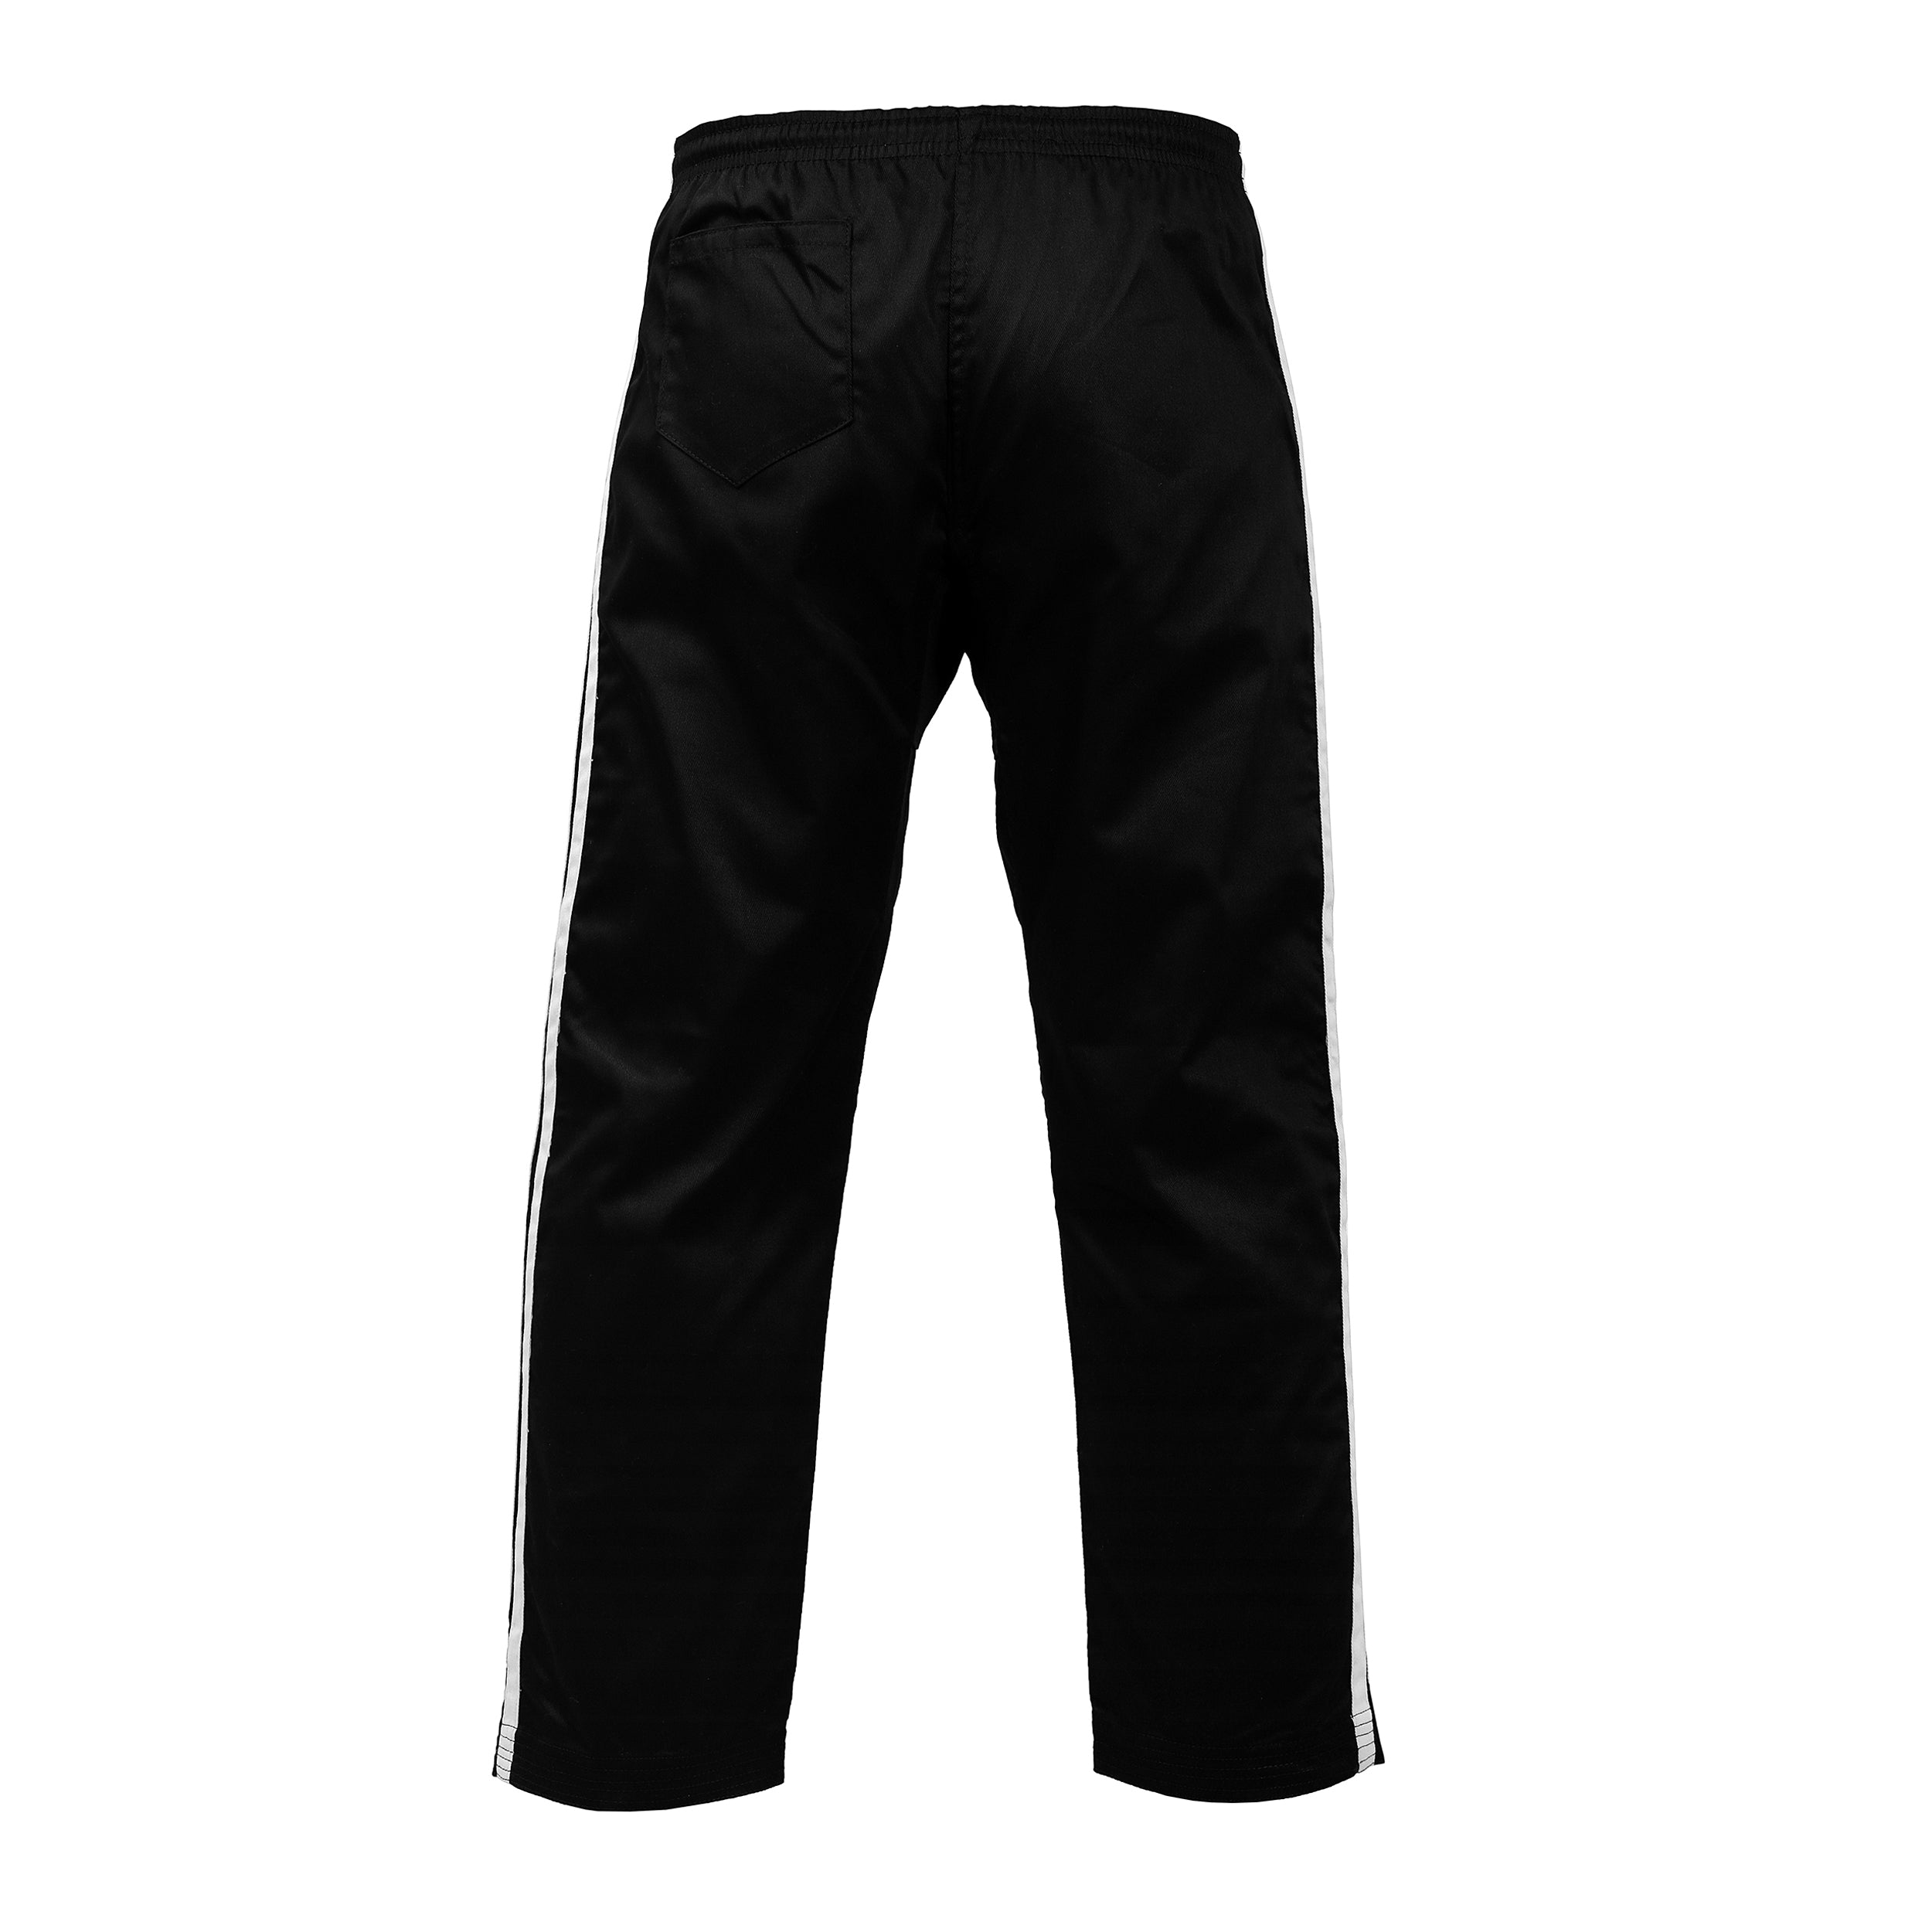 8 oz. Middleweight Contact Pants| Century Martial Arts Canada |Uniforms &  Belts Martial Arts Equipment, Training Bags and Gear – Century Canada